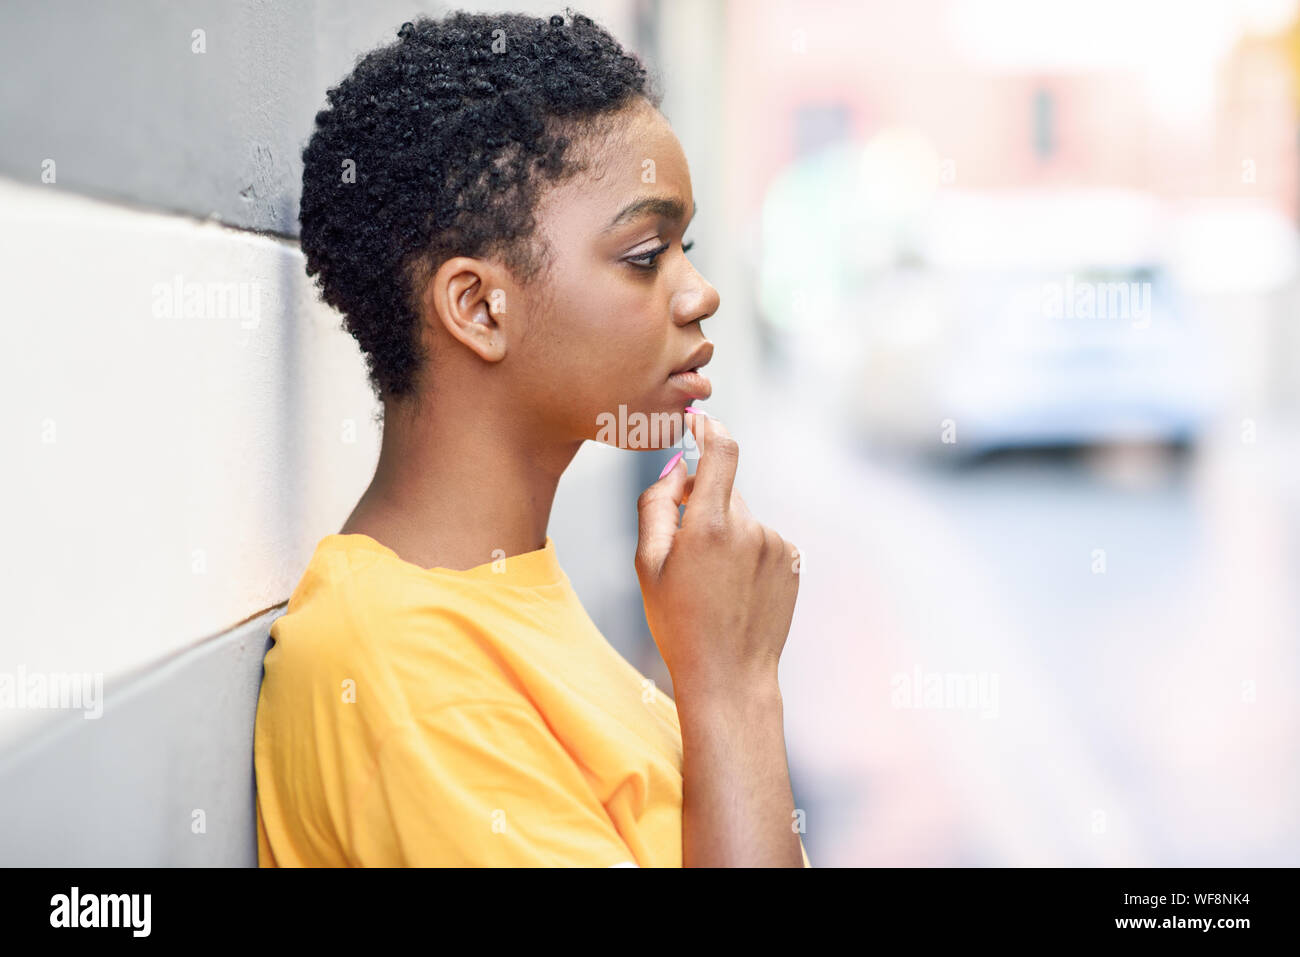 Thoughtful black woman with sad expression outdoors. Stock Photo